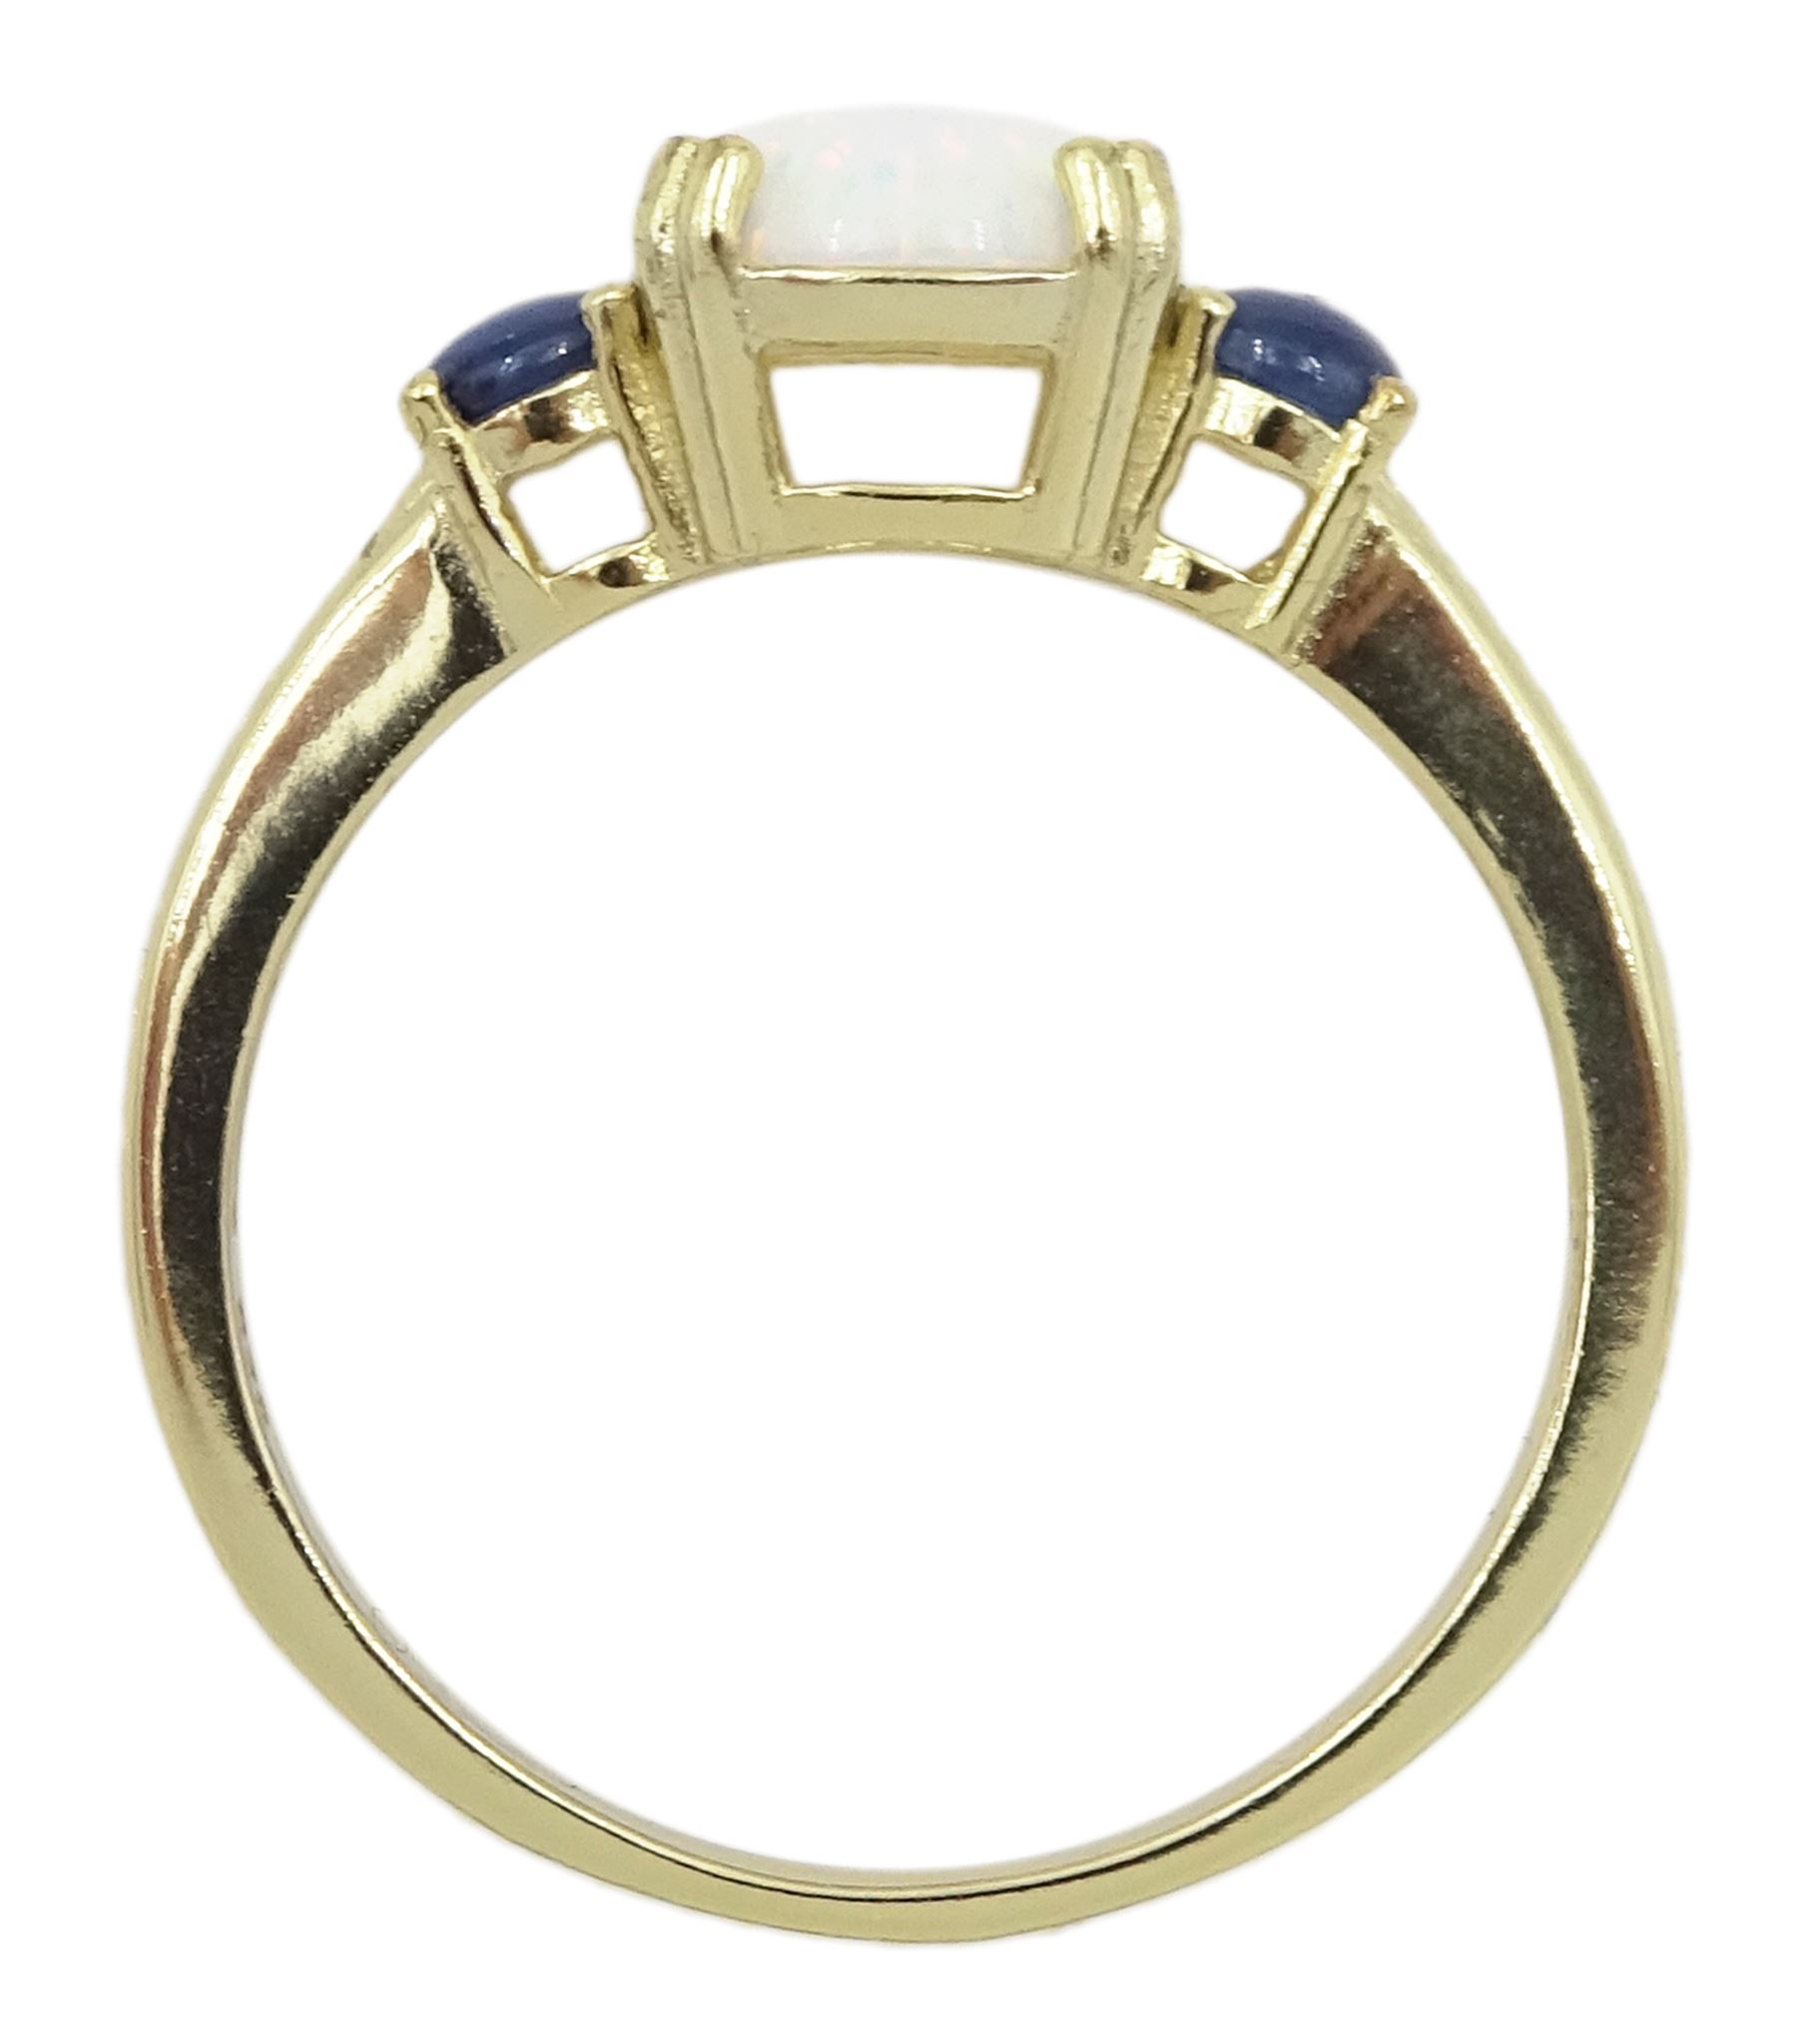 Silver-gilt three stone opal and sapphire ring - Image 4 of 4